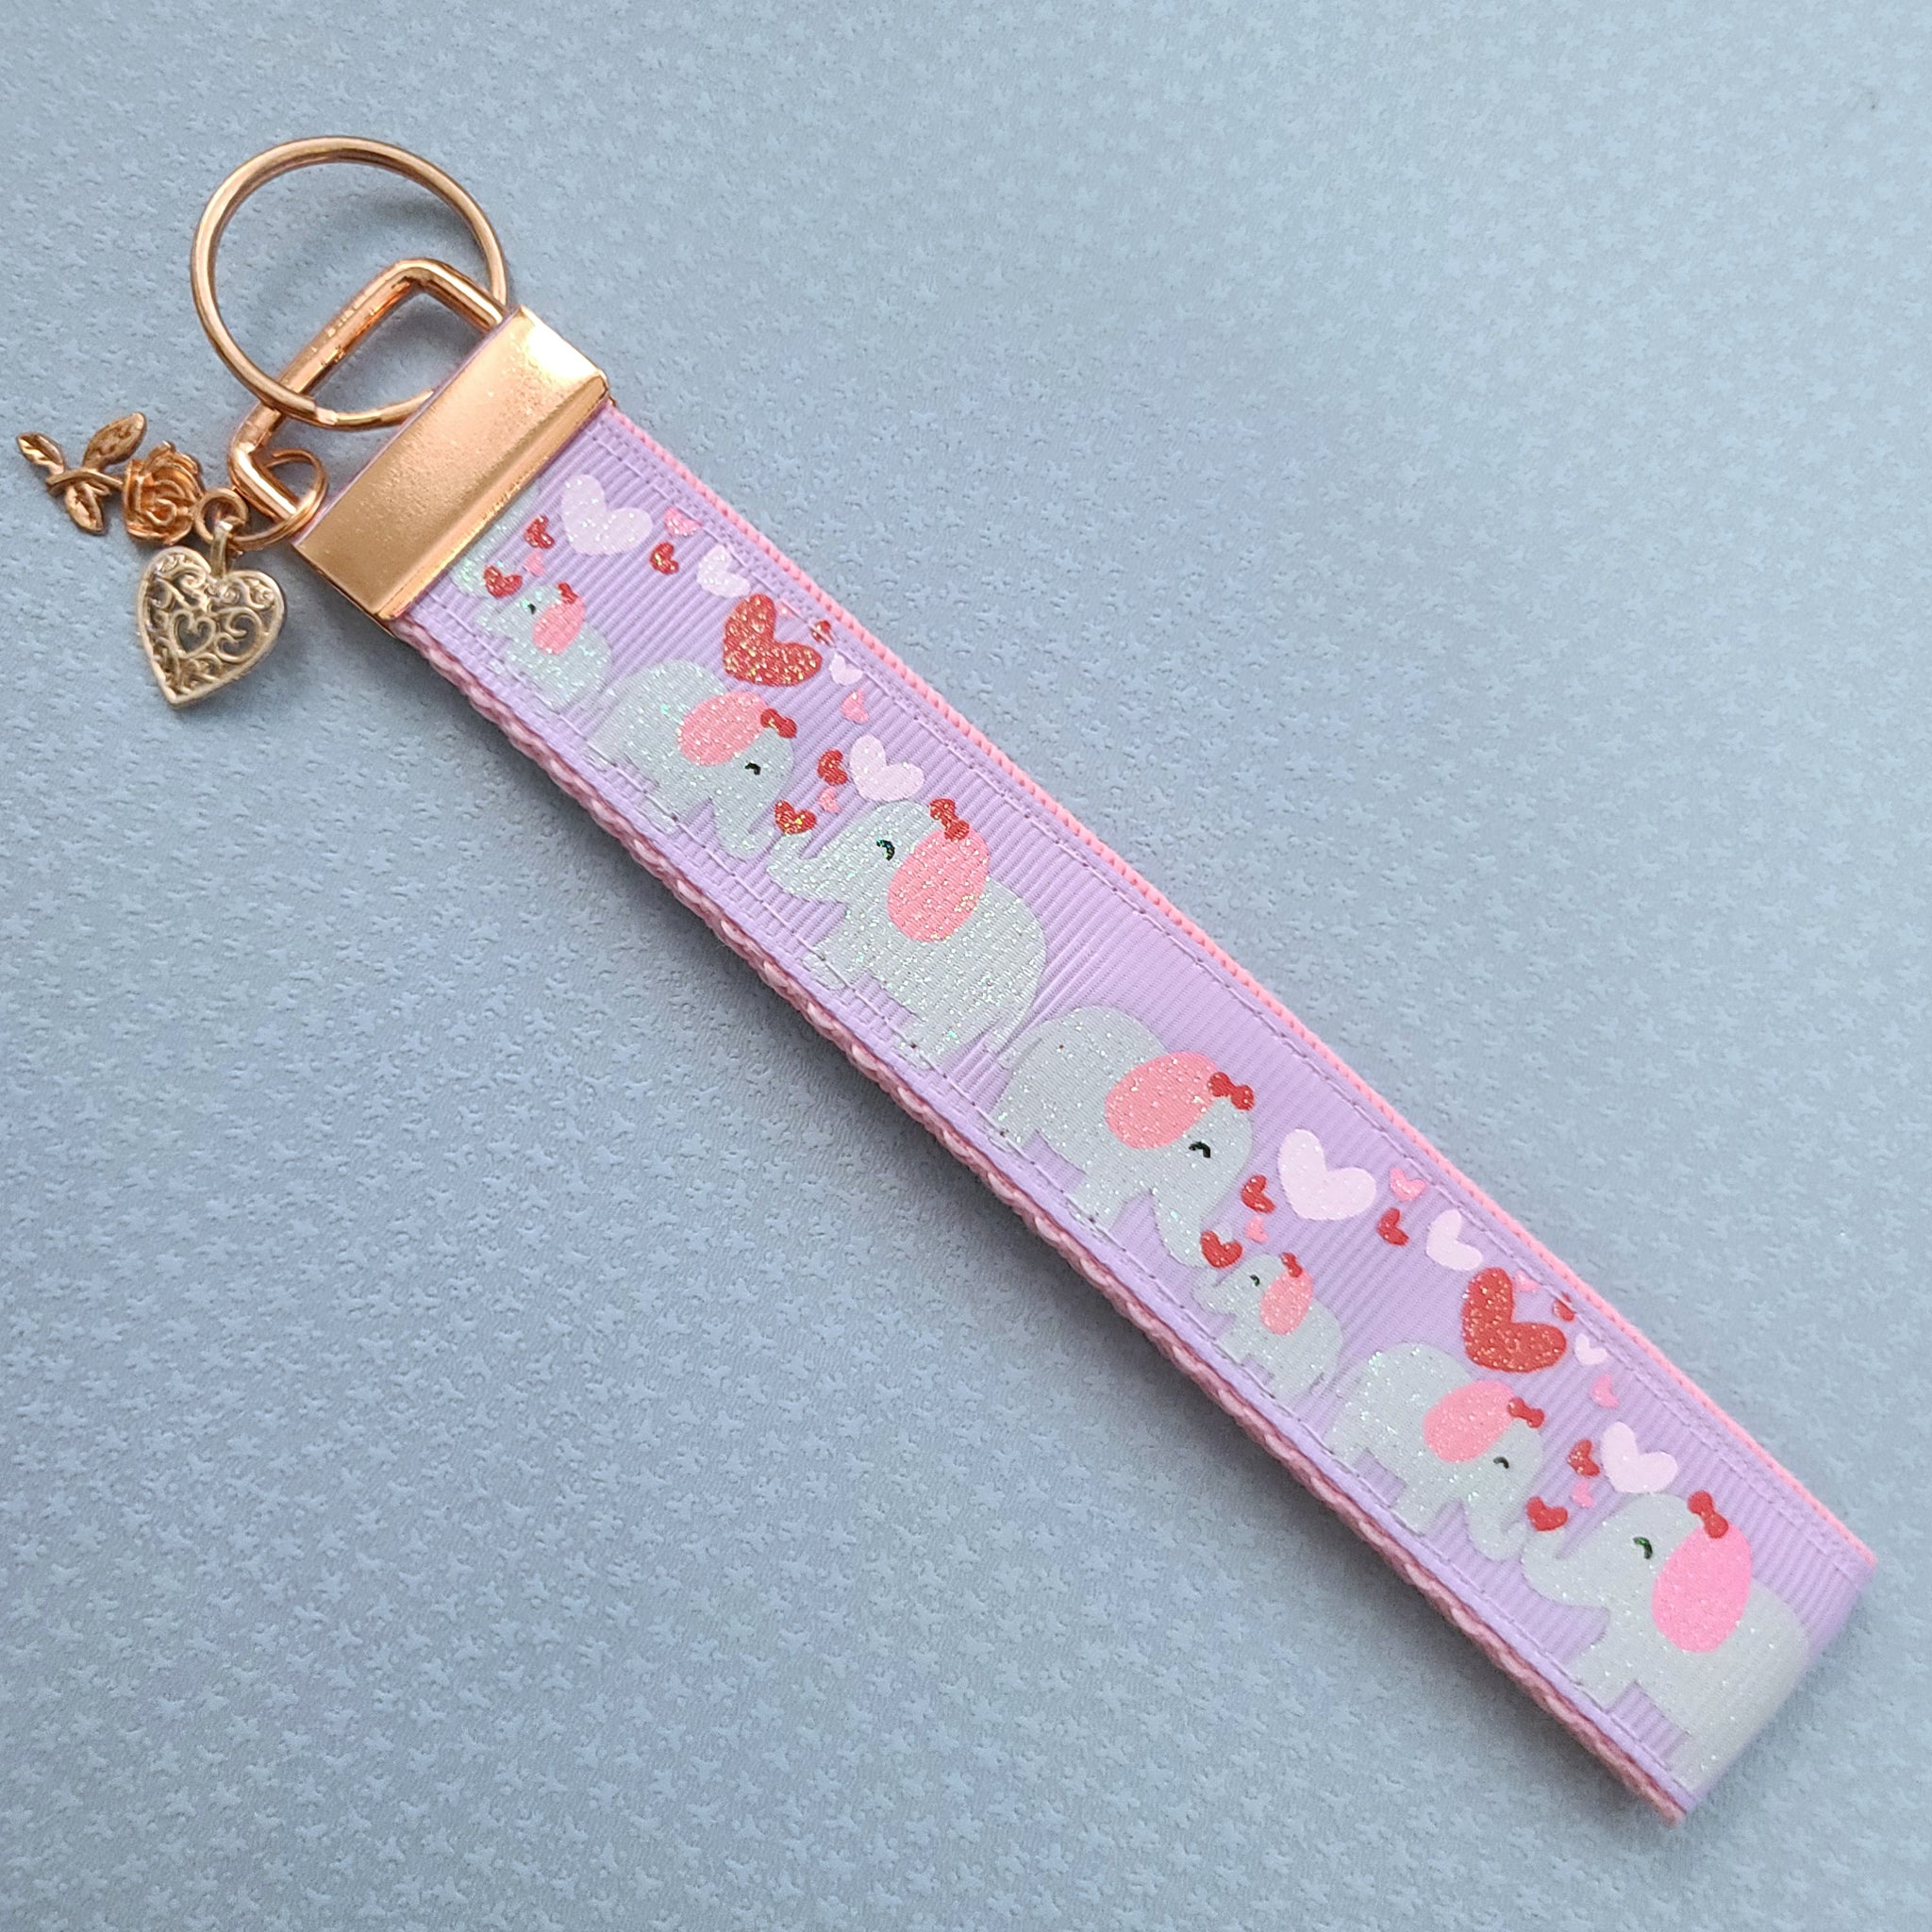 Rose Gold Keychain - Leather Key Ring